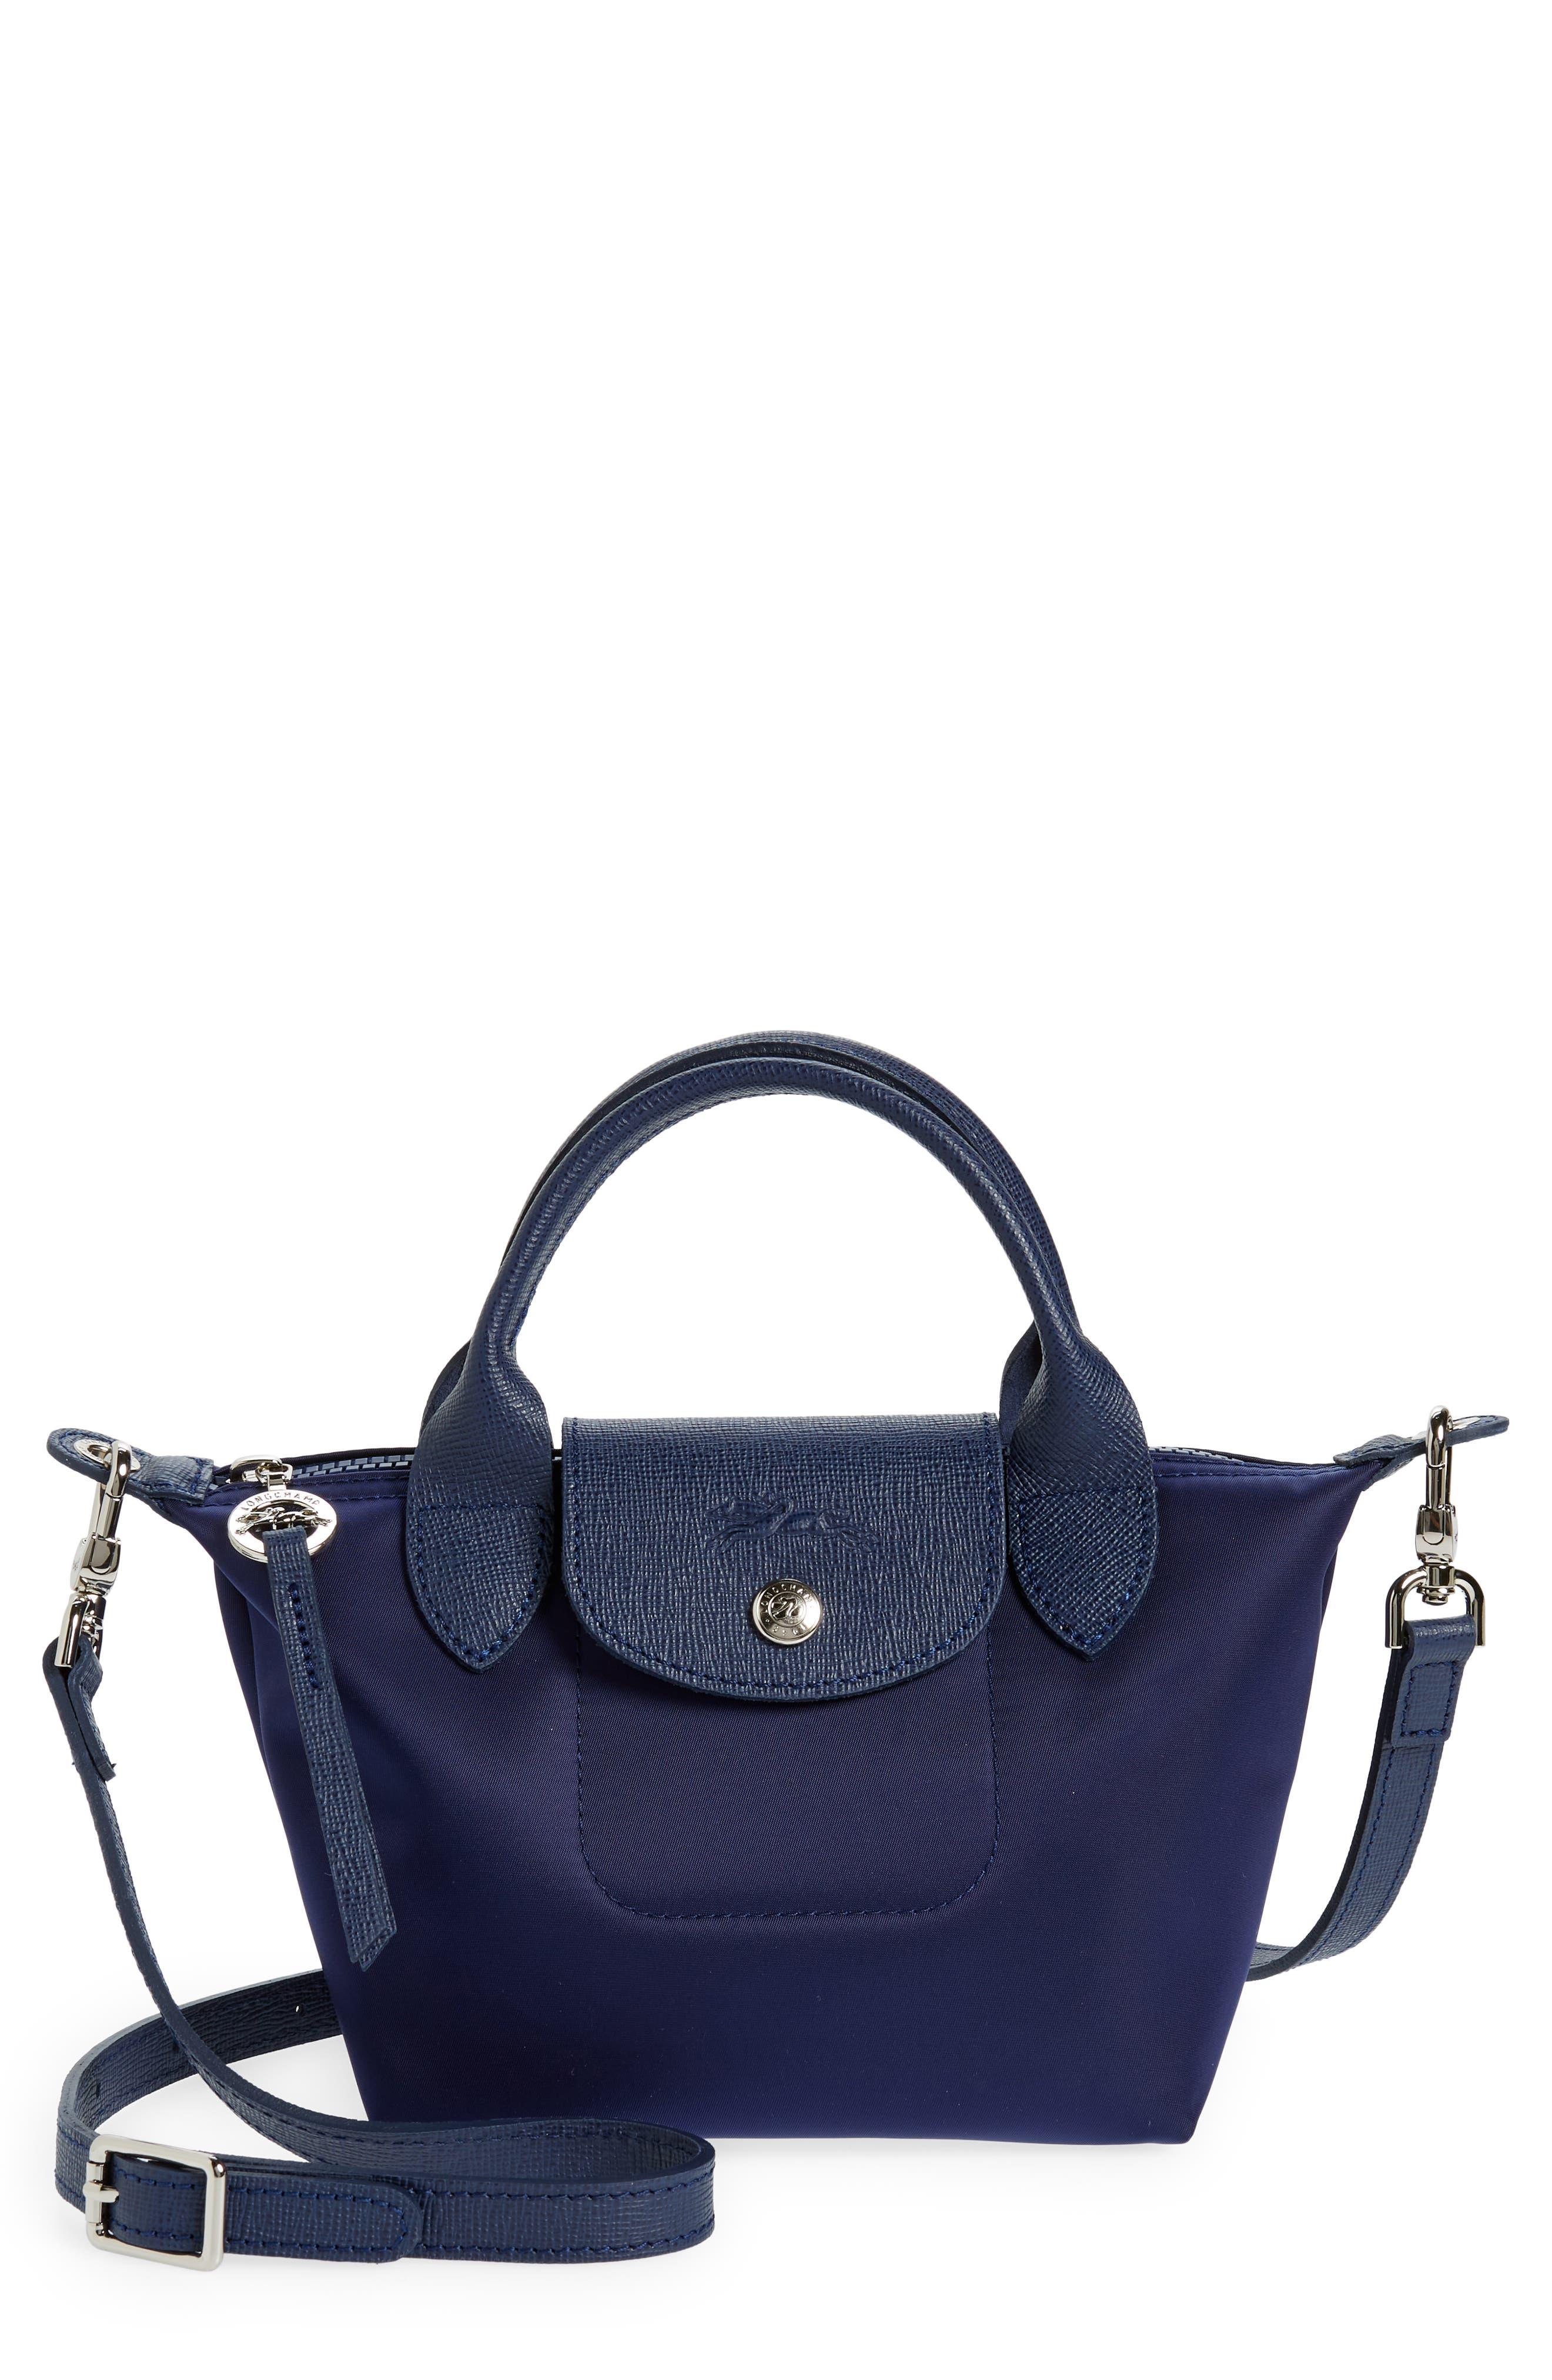 Longchamp Extra Small Le Pliage Neo Nylon Top Handle Bag in Blue | Lyst